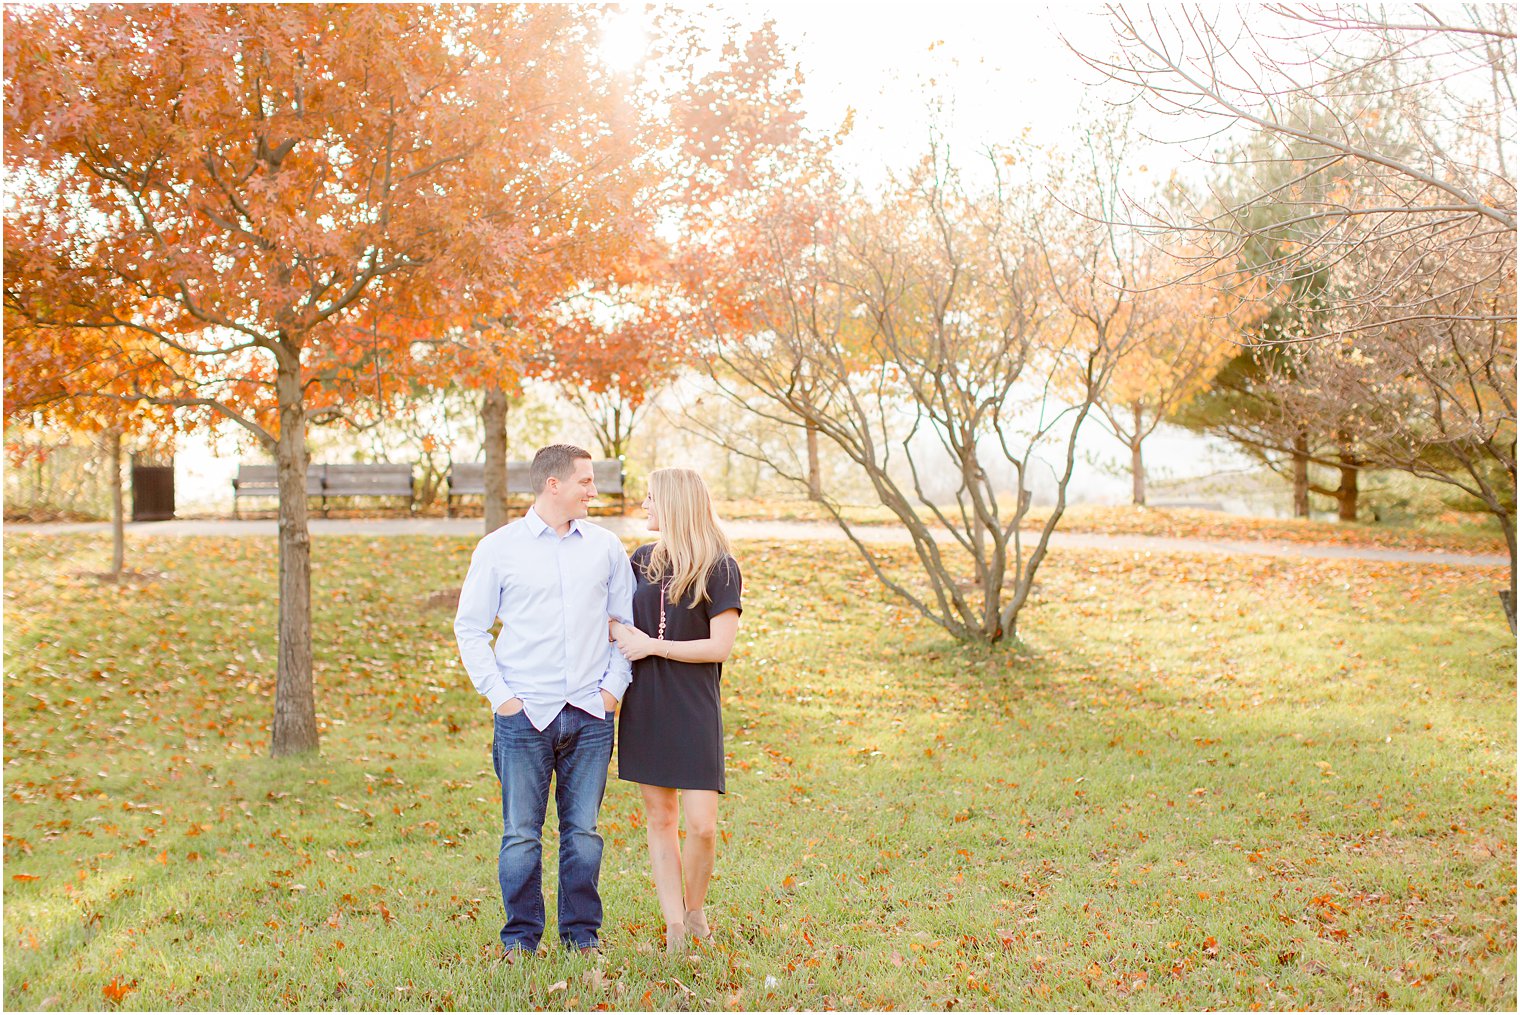 Engagement session with fall foliage